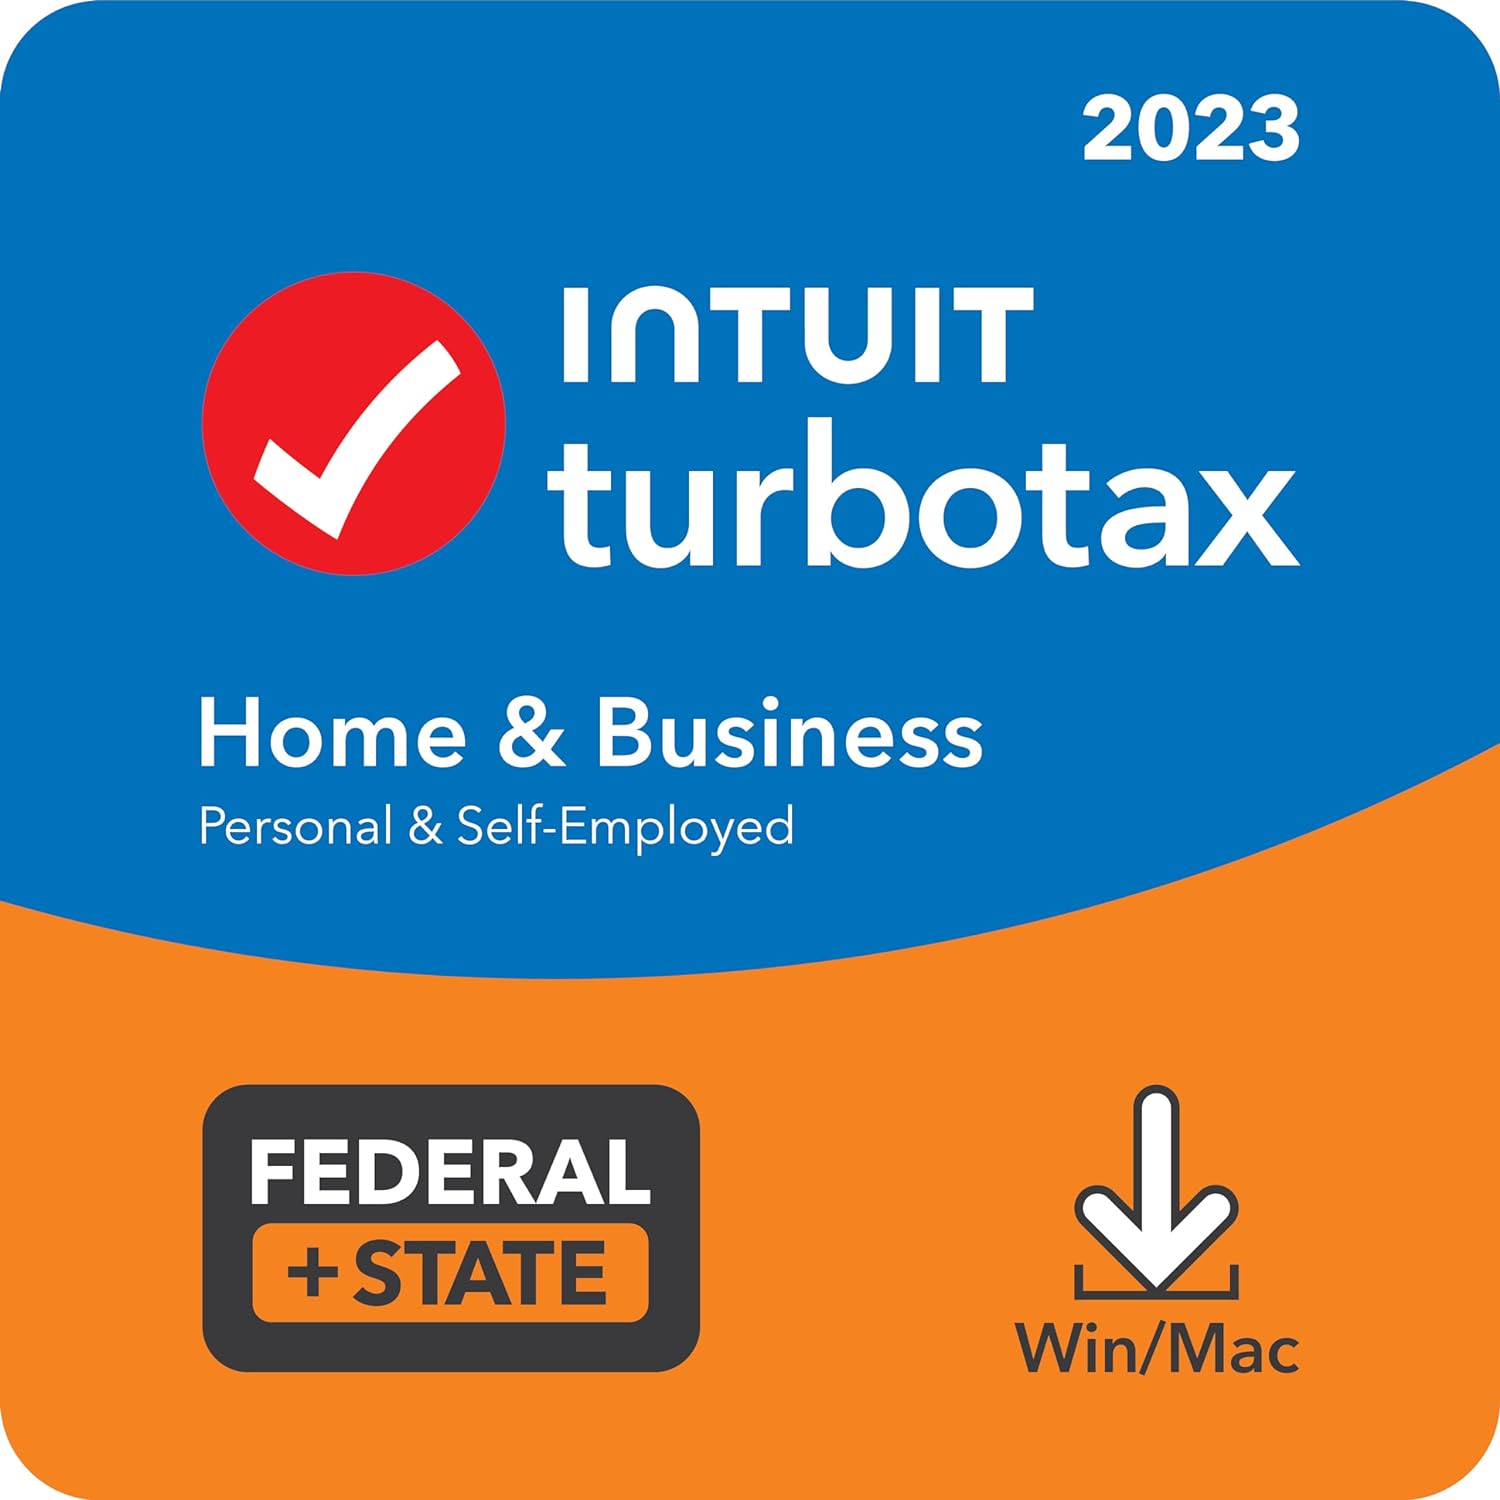 TurboTax Home & Business 2023 $75.99